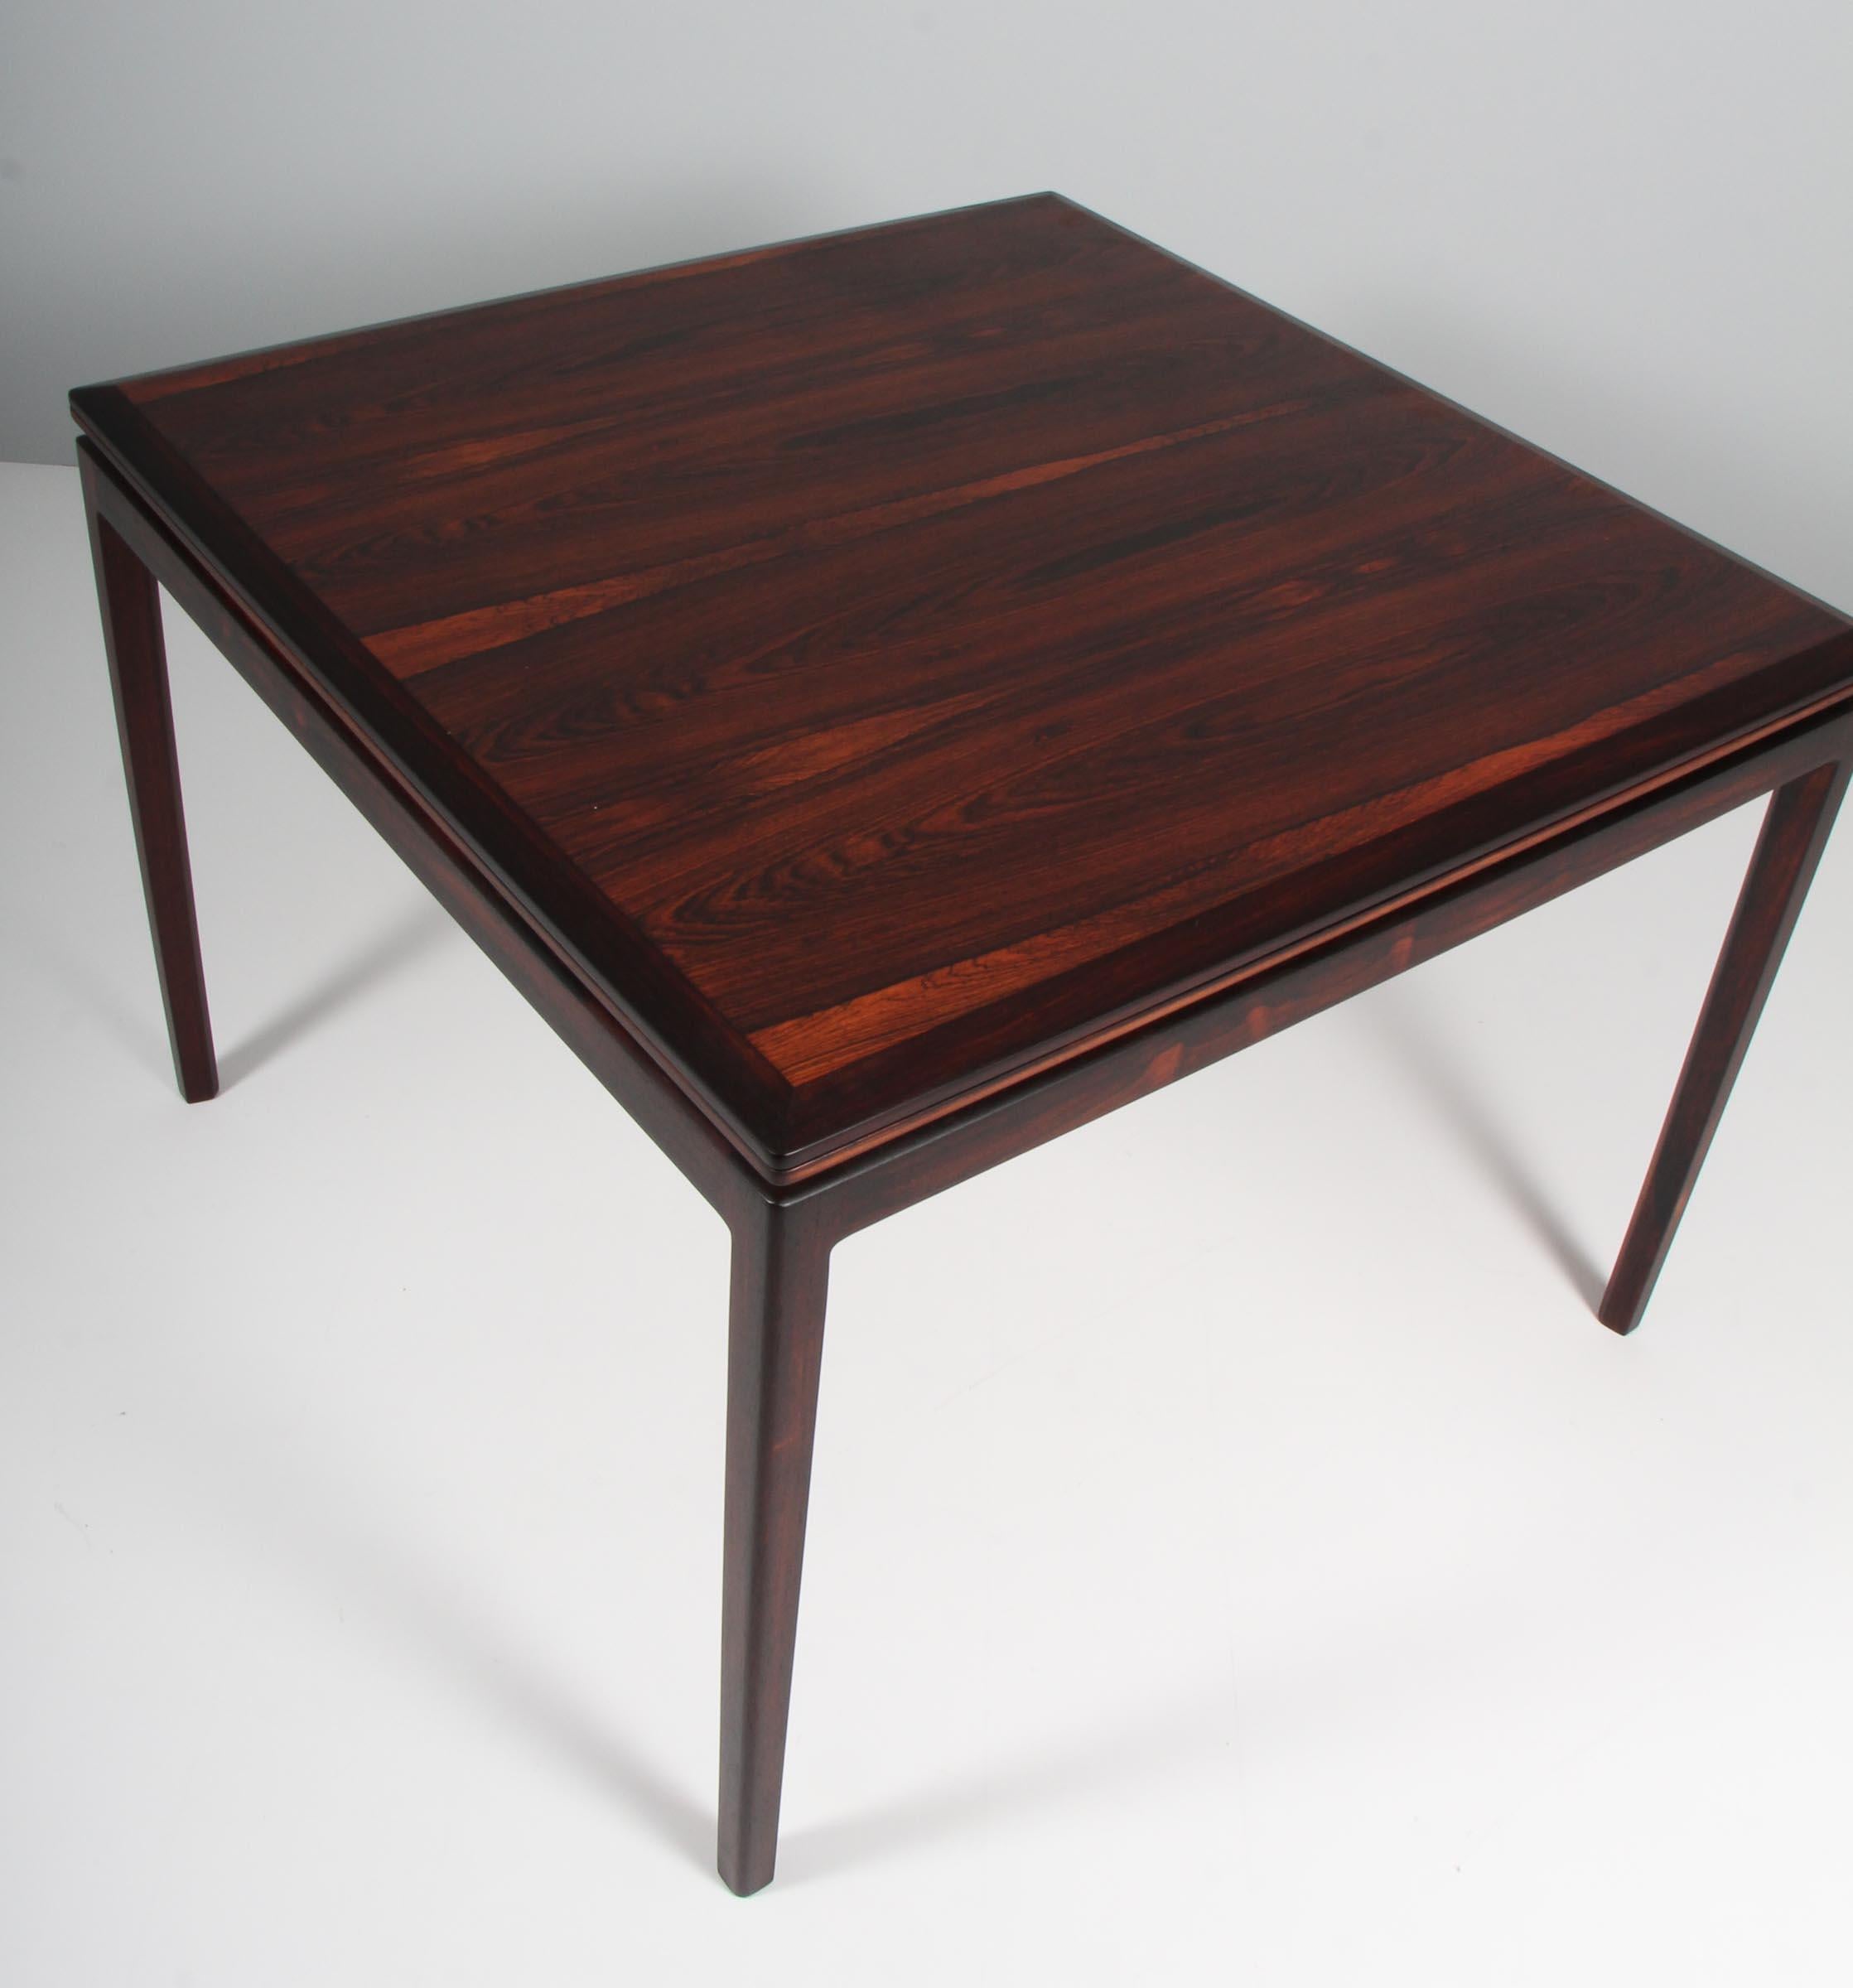 Ib Kofod-Larsen dining table in partly solid rosewood. Flip flop extension leaf.

Made by Christensen & Larsen.